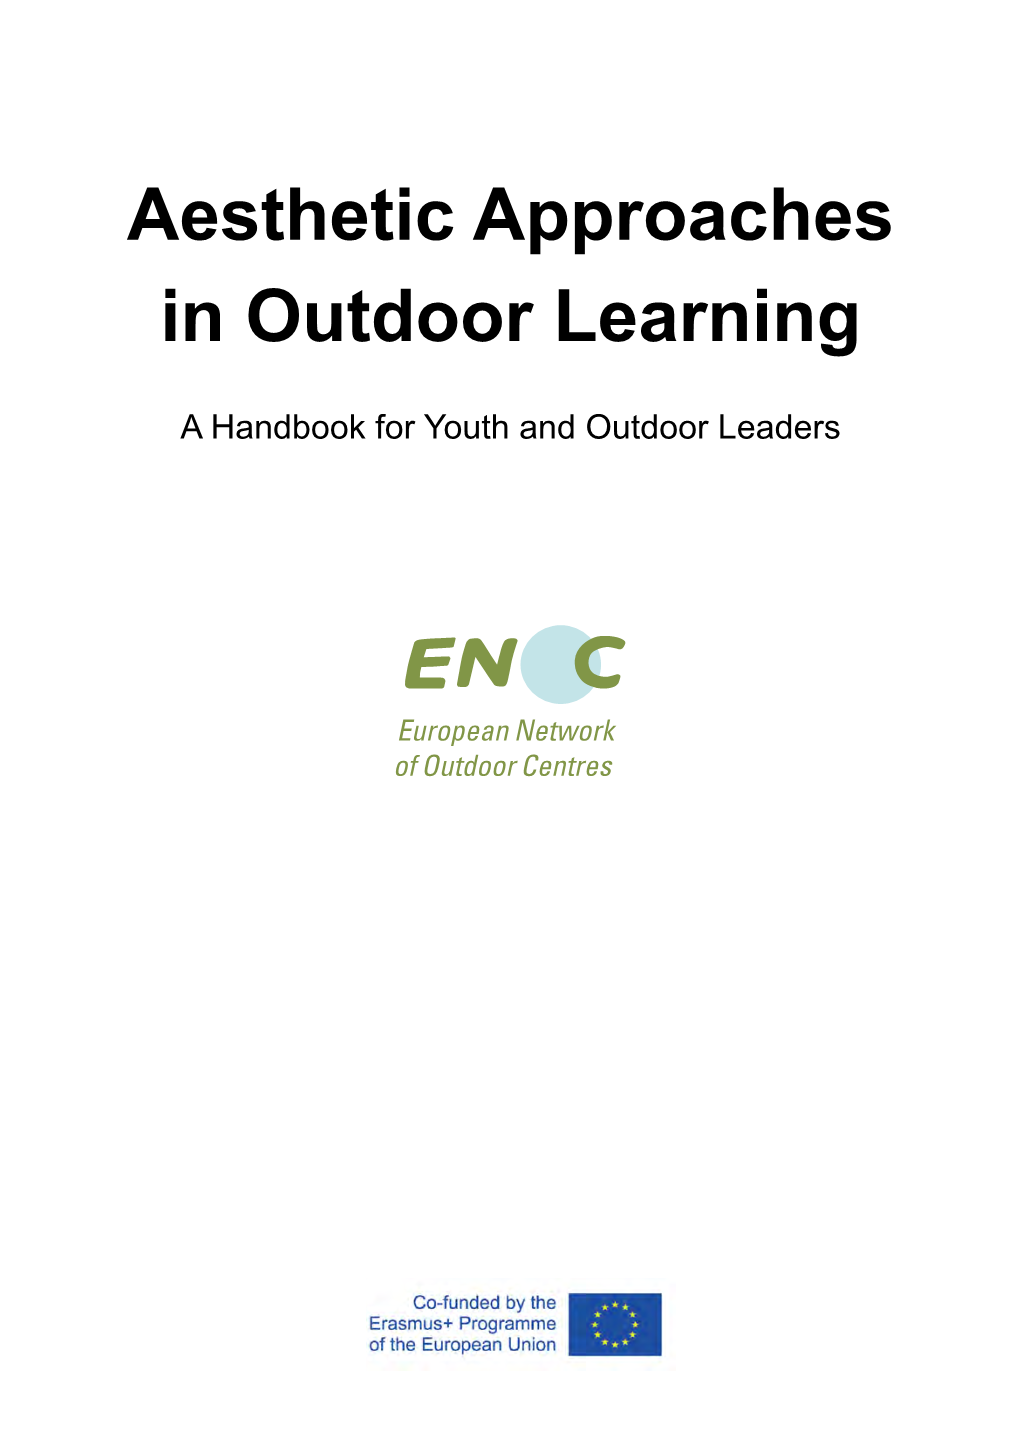 Aesthetic Approaches in Outdoor Learning